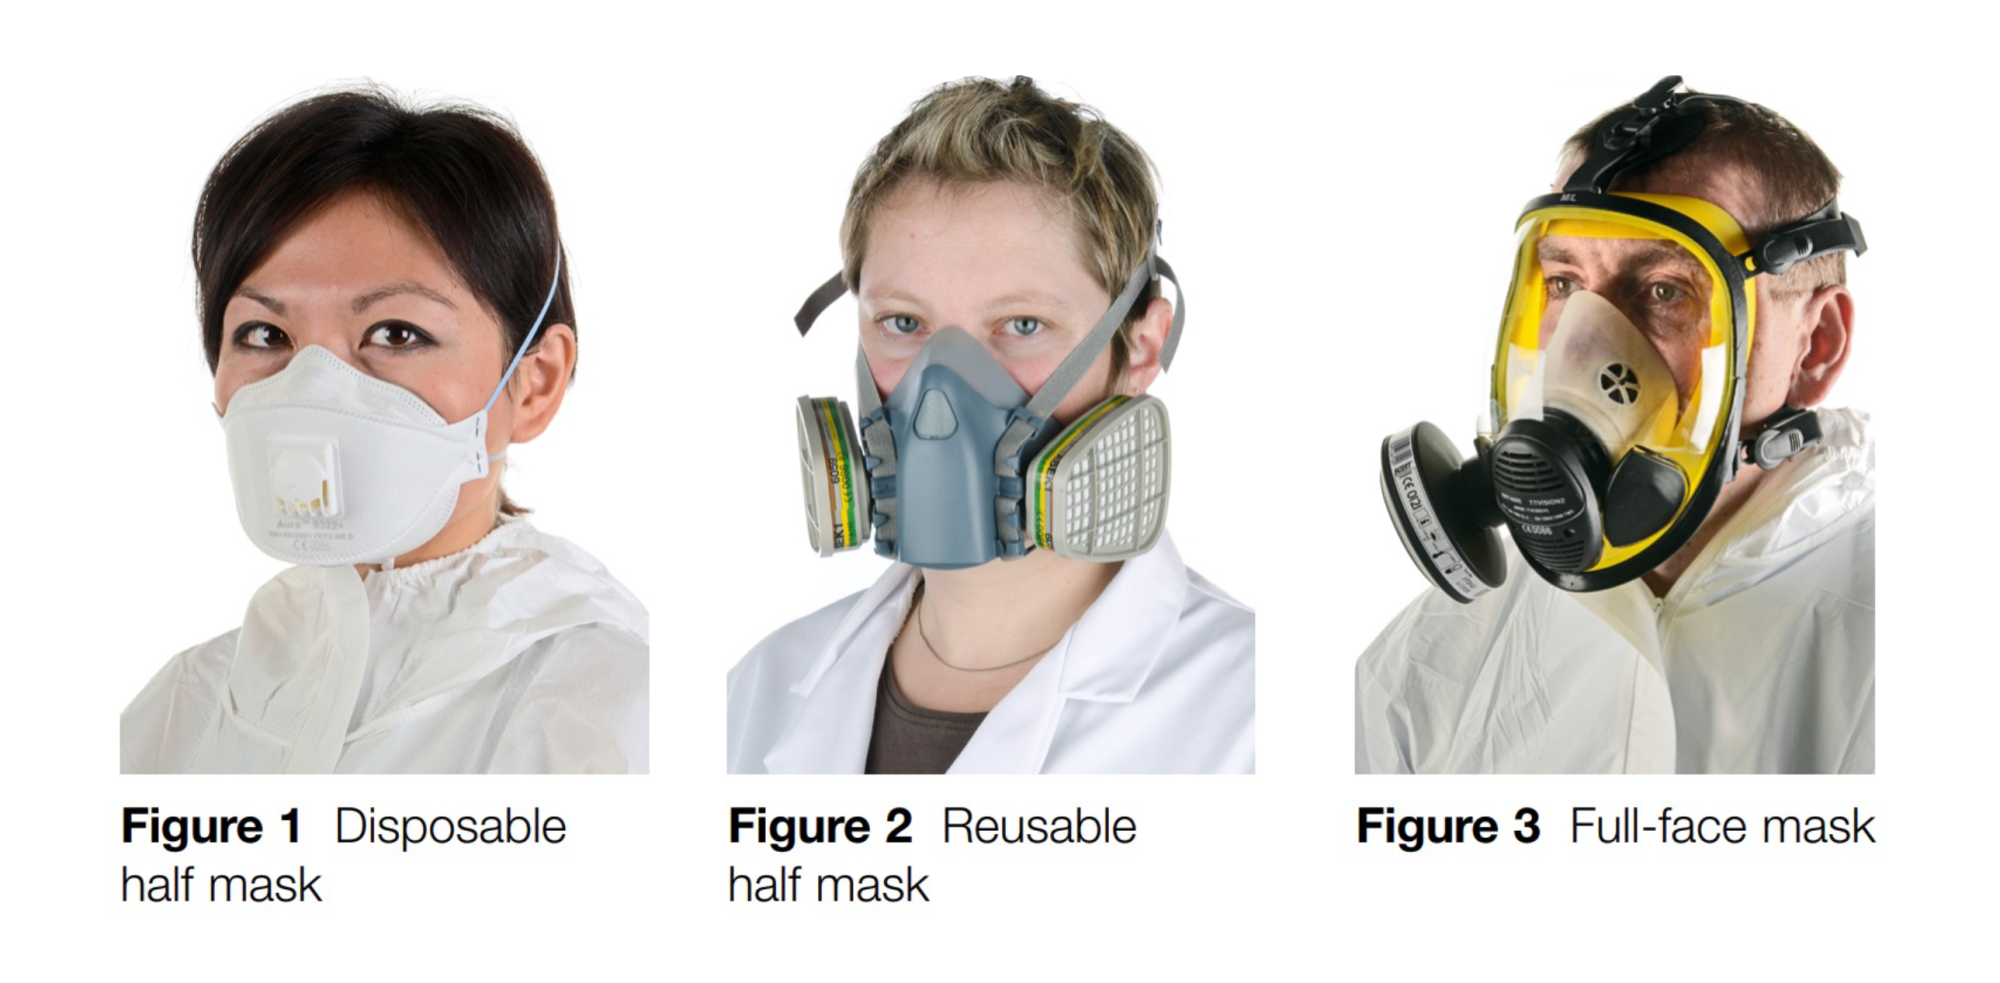 Face fit testing of respiratory protective equipment